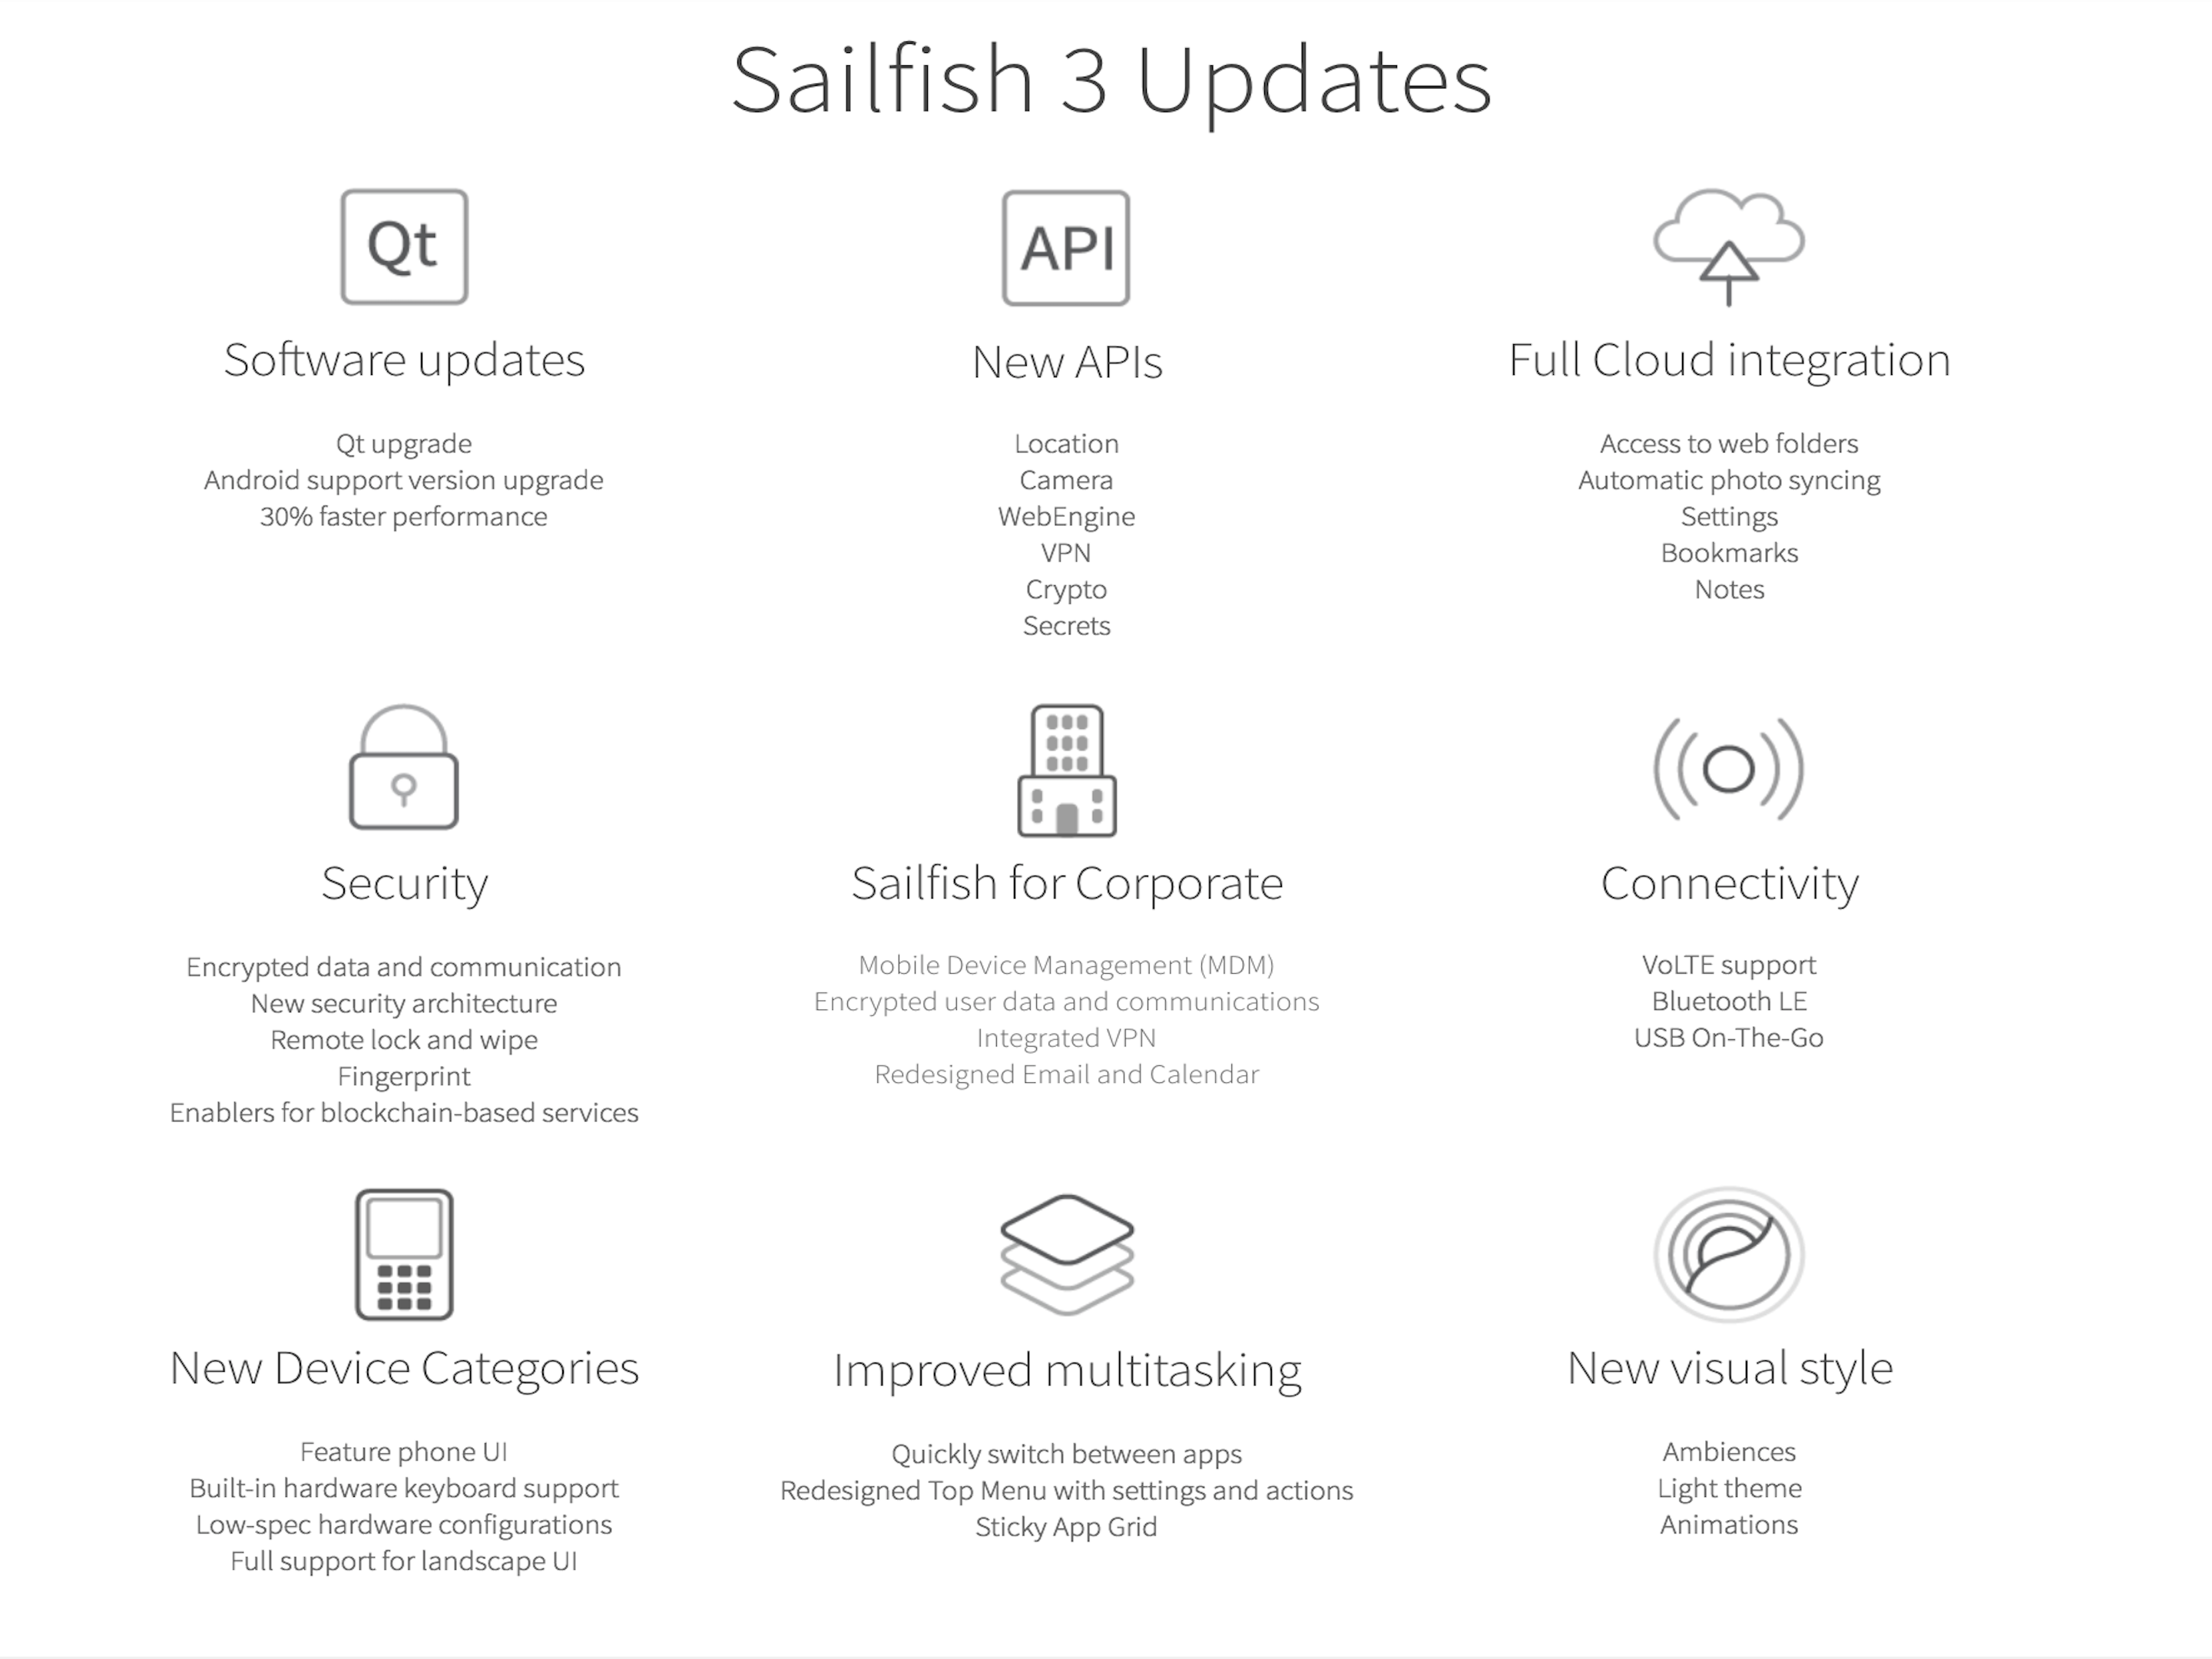 A list of all the updates coming to Sailfish OS